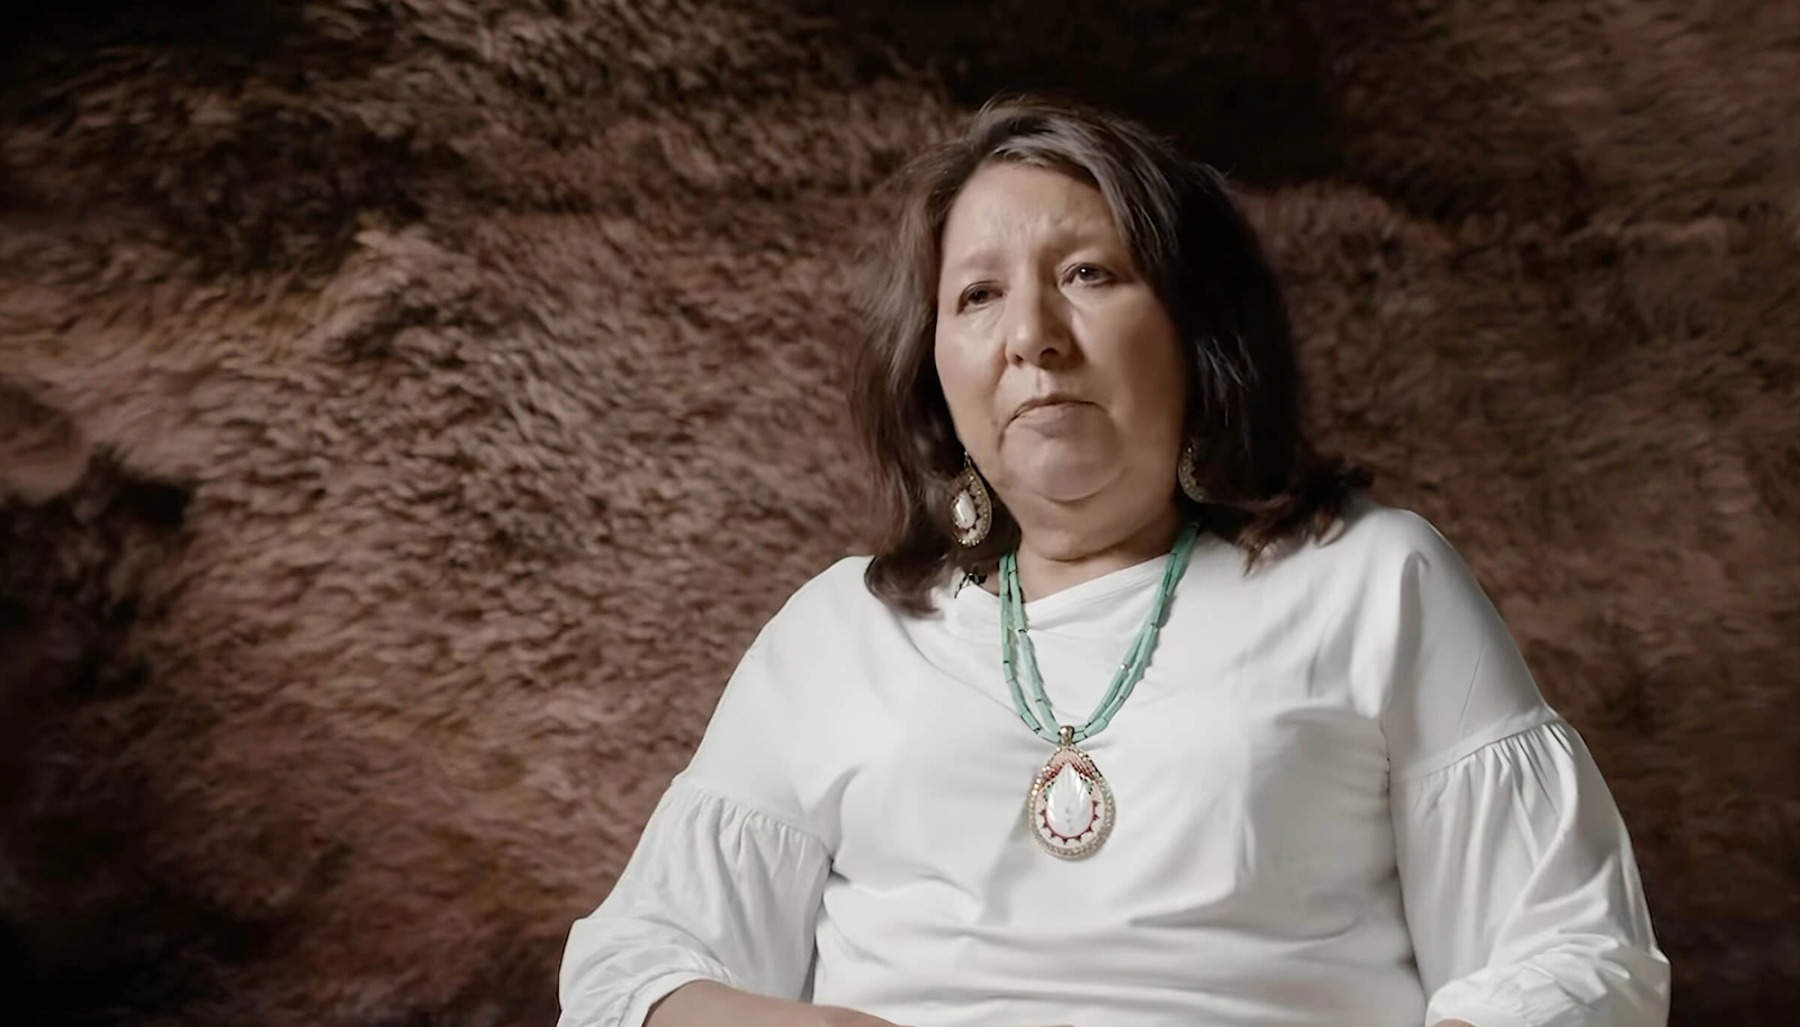 A woman in a white shirt and necklace, being interviewed about land acknowledgement